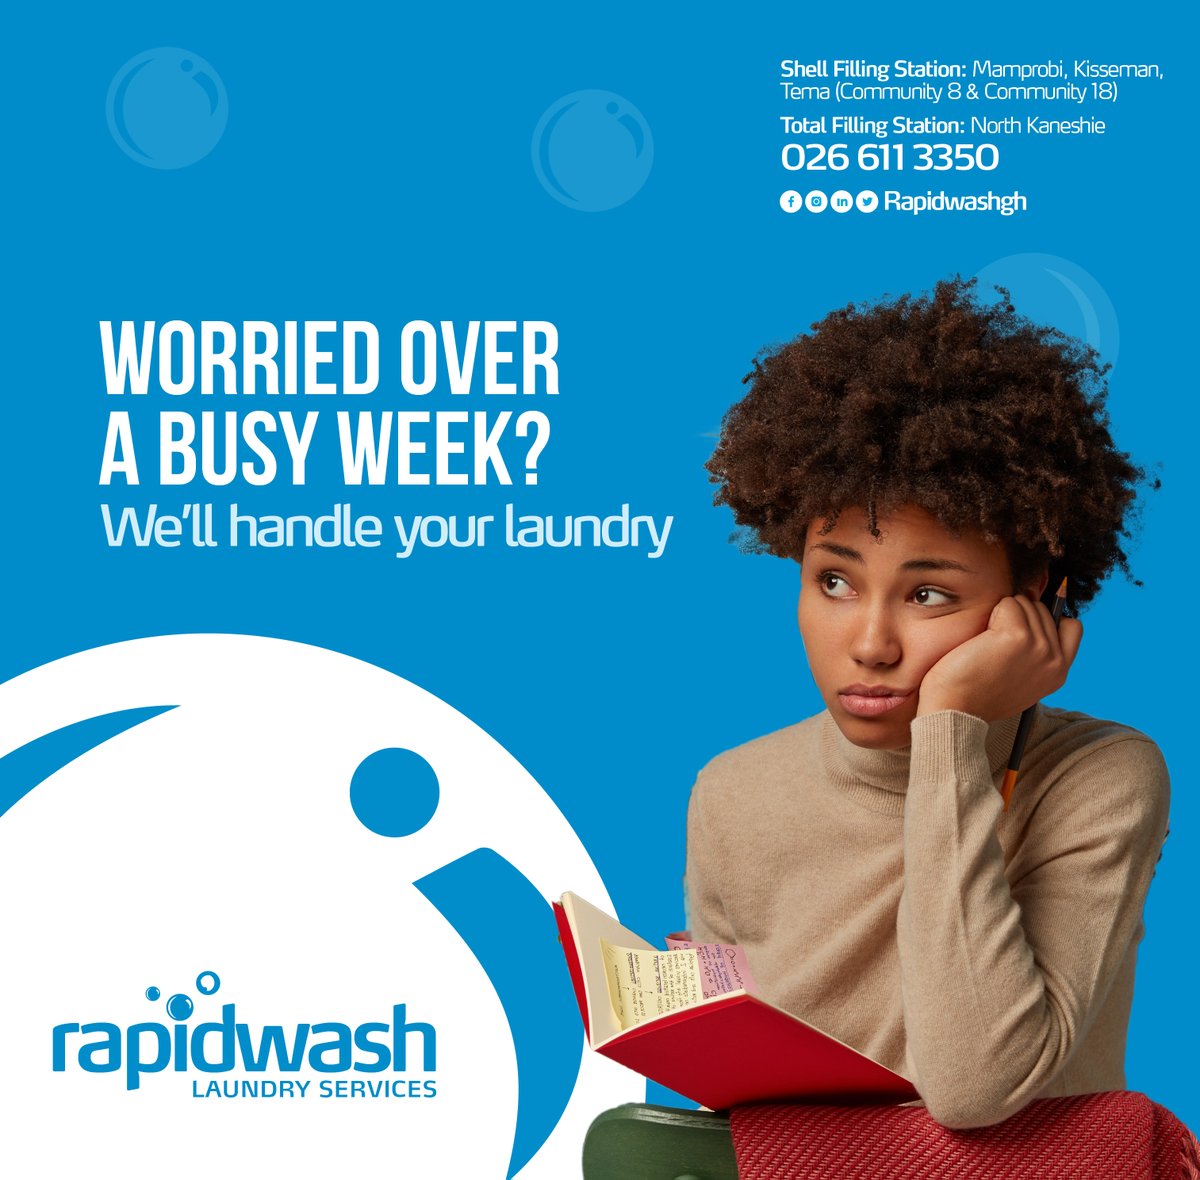 A busy week with loads of laundry to do can get you worked up.
Why worry when you can just hit the dial? 😃😃

#value #laundry #onabudget #Rapidwash #shellfillingstation #peaceofmind #tuesdayvibes #terrifictuesday #totalfillingstation